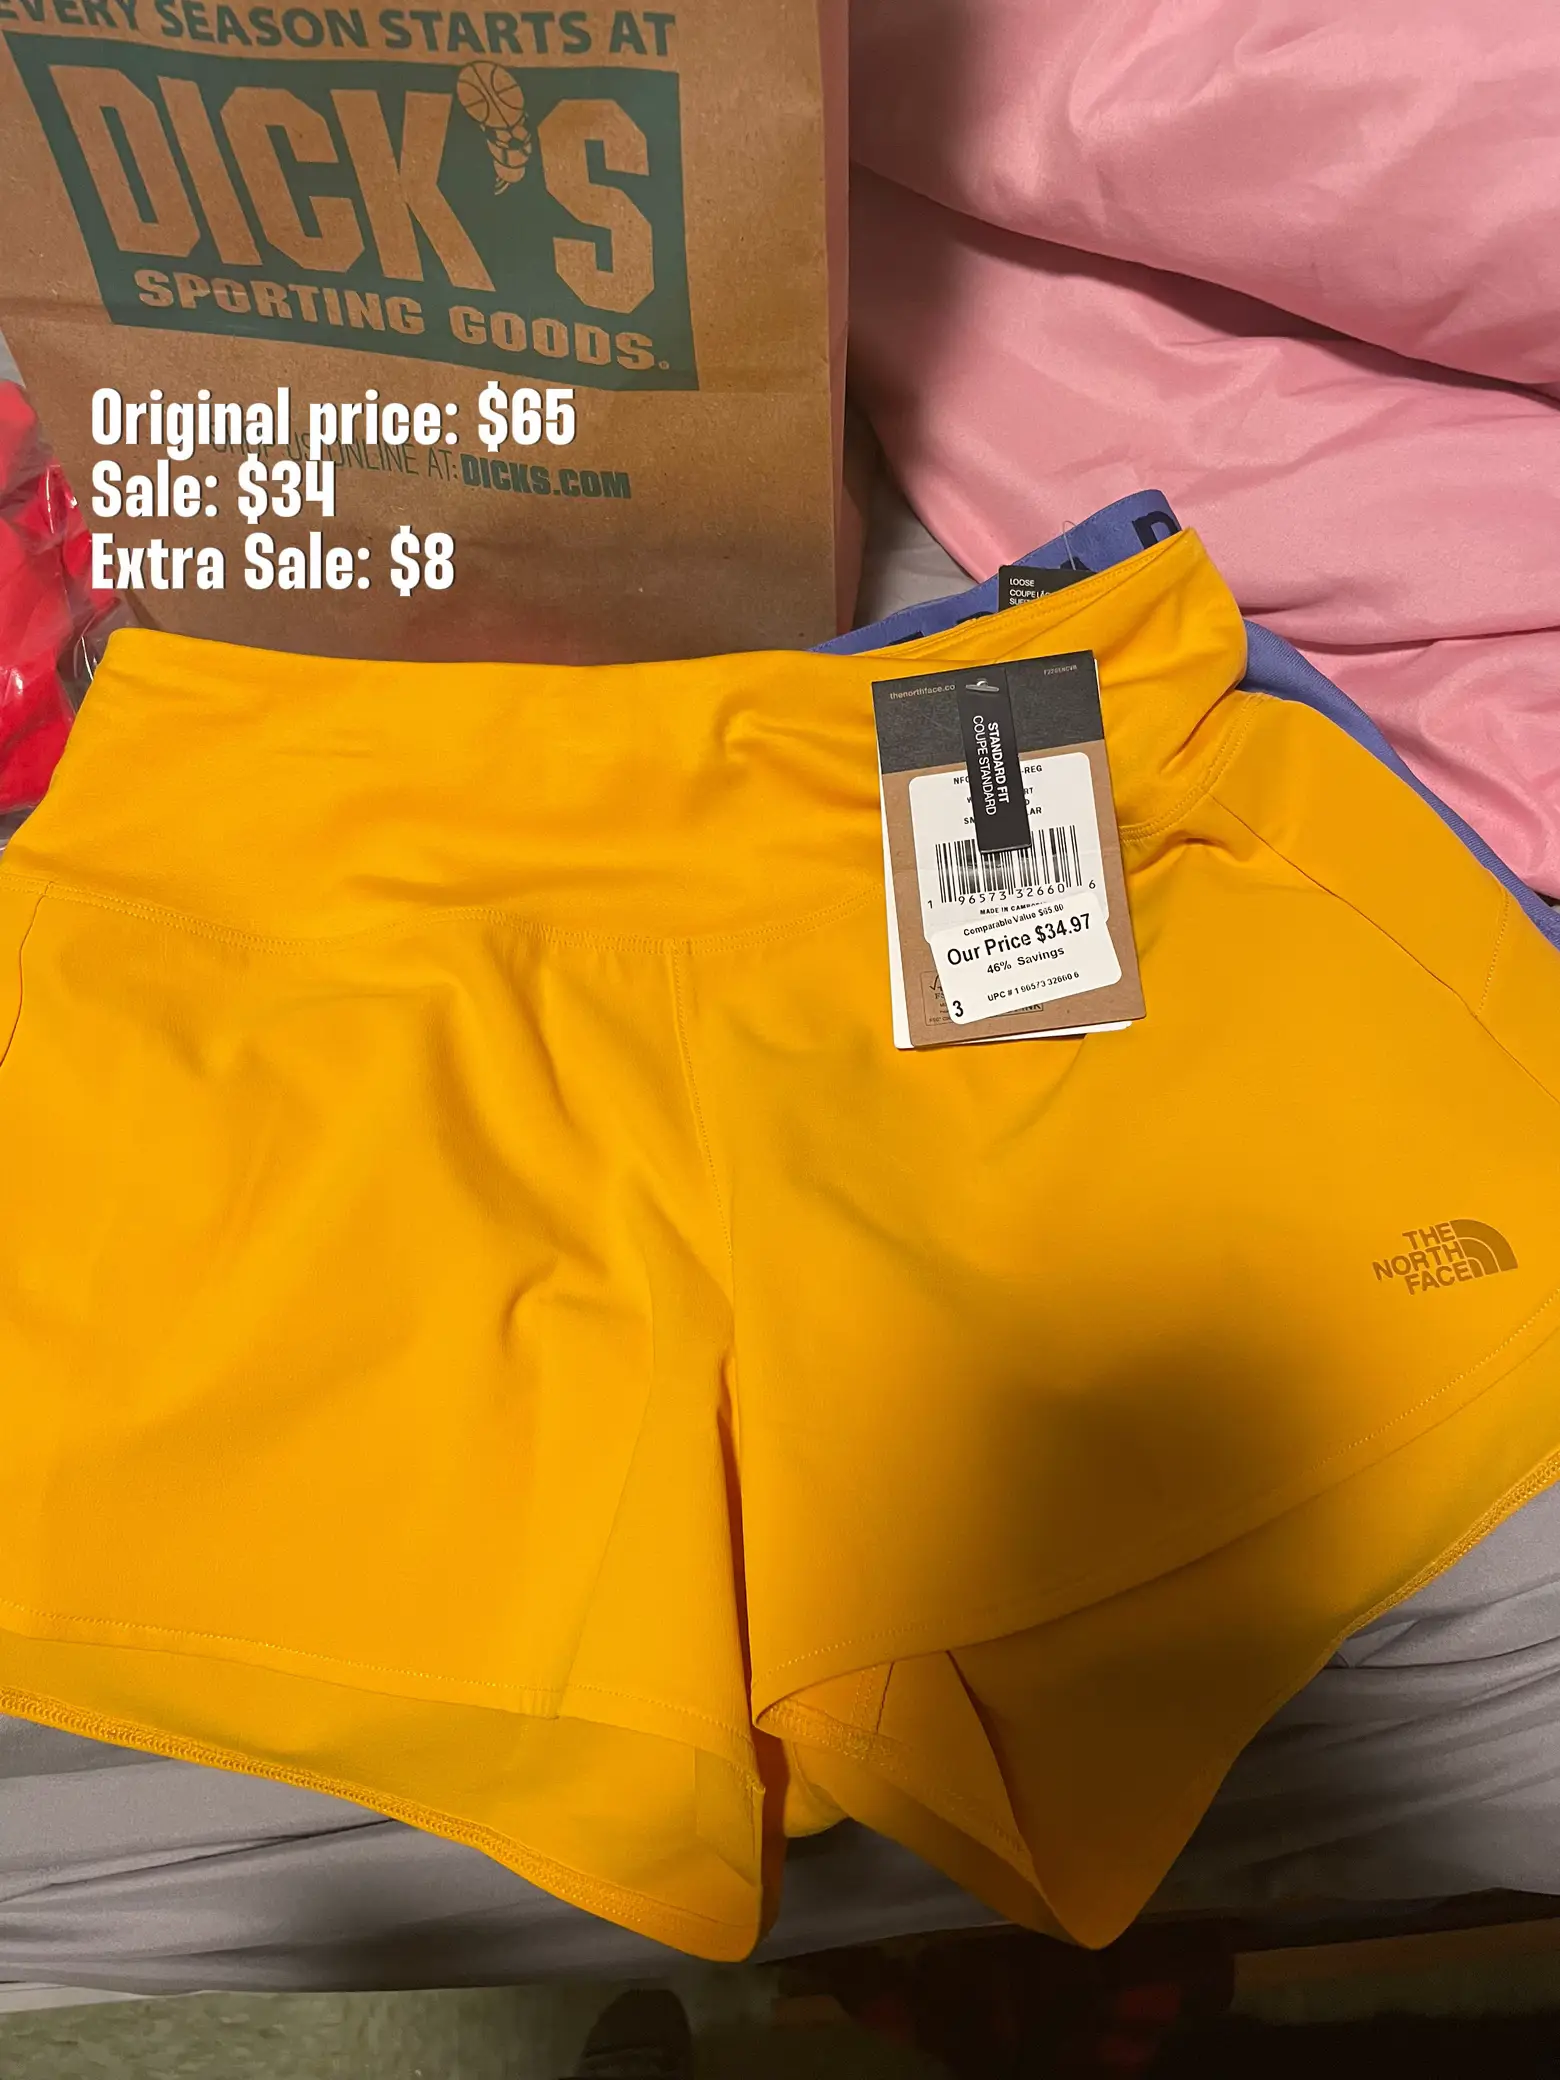 The North Face Shorts  Curbside Pickup Available at DICK'S